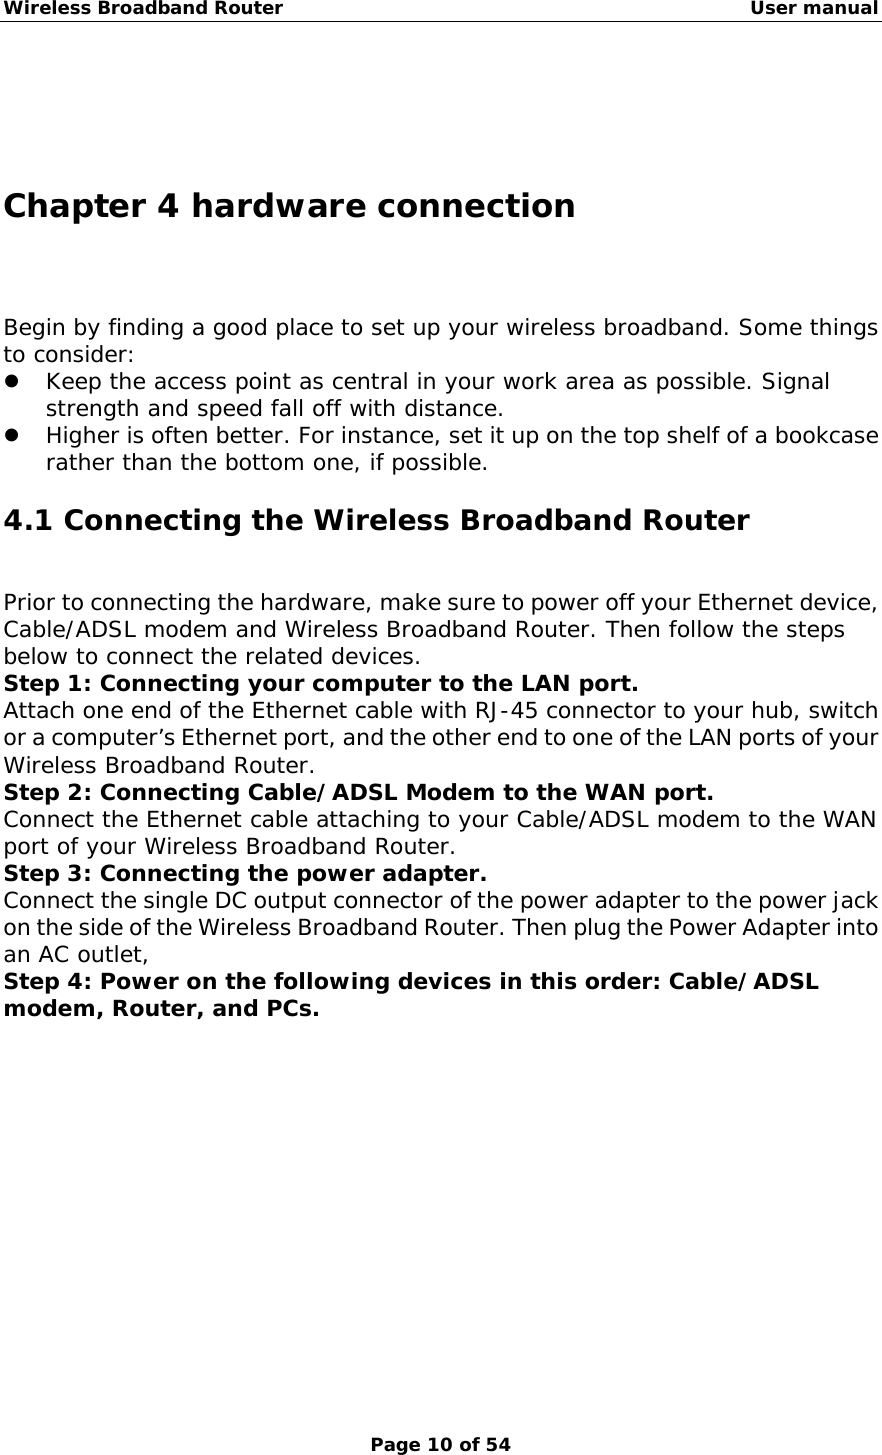 Wireless Broadband Router                                                   User manual Page 10 of 54    Chapter 4 hardware connection Begin by finding a good place to set up your wireless broadband. Some things to consider:ٛ  z Keep the access point as central in your work area as possible. Signal strength and speed fall off with distance.  z Higher is often better. For instance, set it up on the top shelf of a bookcase rather than the bottom one, if possible. 4.1 Connecting the Wireless Broadband Router Prior to connecting the hardware, make sure to power off your Ethernet device, Cable/ADSL modem and Wireless Broadband Router. Then follow the steps below to connect the related devices. Step 1: Connecting your computer to the LAN port. Attach one end of the Ethernet cable with RJ-45 connector to your hub, switch or a computer’s Ethernet port, and the other end to one of the LAN ports of your Wireless Broadband Router. Step 2: Connecting Cable/ADSL Modem to the WAN port. Connect the Ethernet cable attaching to your Cable/ADSL modem to the WAN port of your Wireless Broadband Router. Step 3: Connecting the power adapter. Connect the single DC output connector of the power adapter to the power jack on the side of the Wireless Broadband Router. Then plug the Power Adapter into an AC outlet, Step 4: Power on the following devices in this order: Cable/ADSL modem, Router, and PCs.            